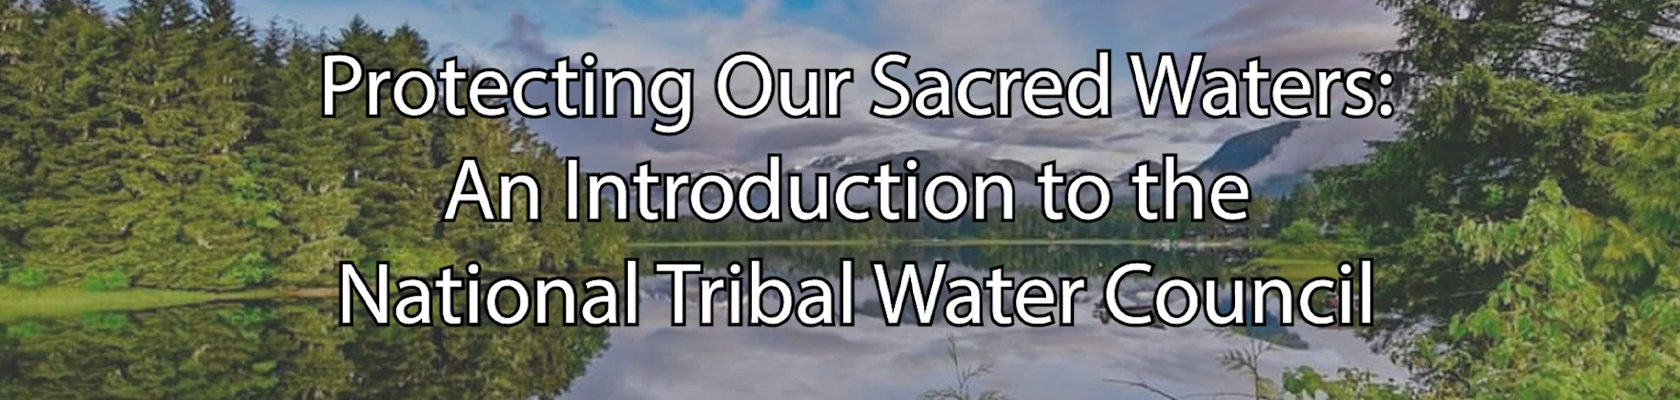 Protecting Our Sacred Waters